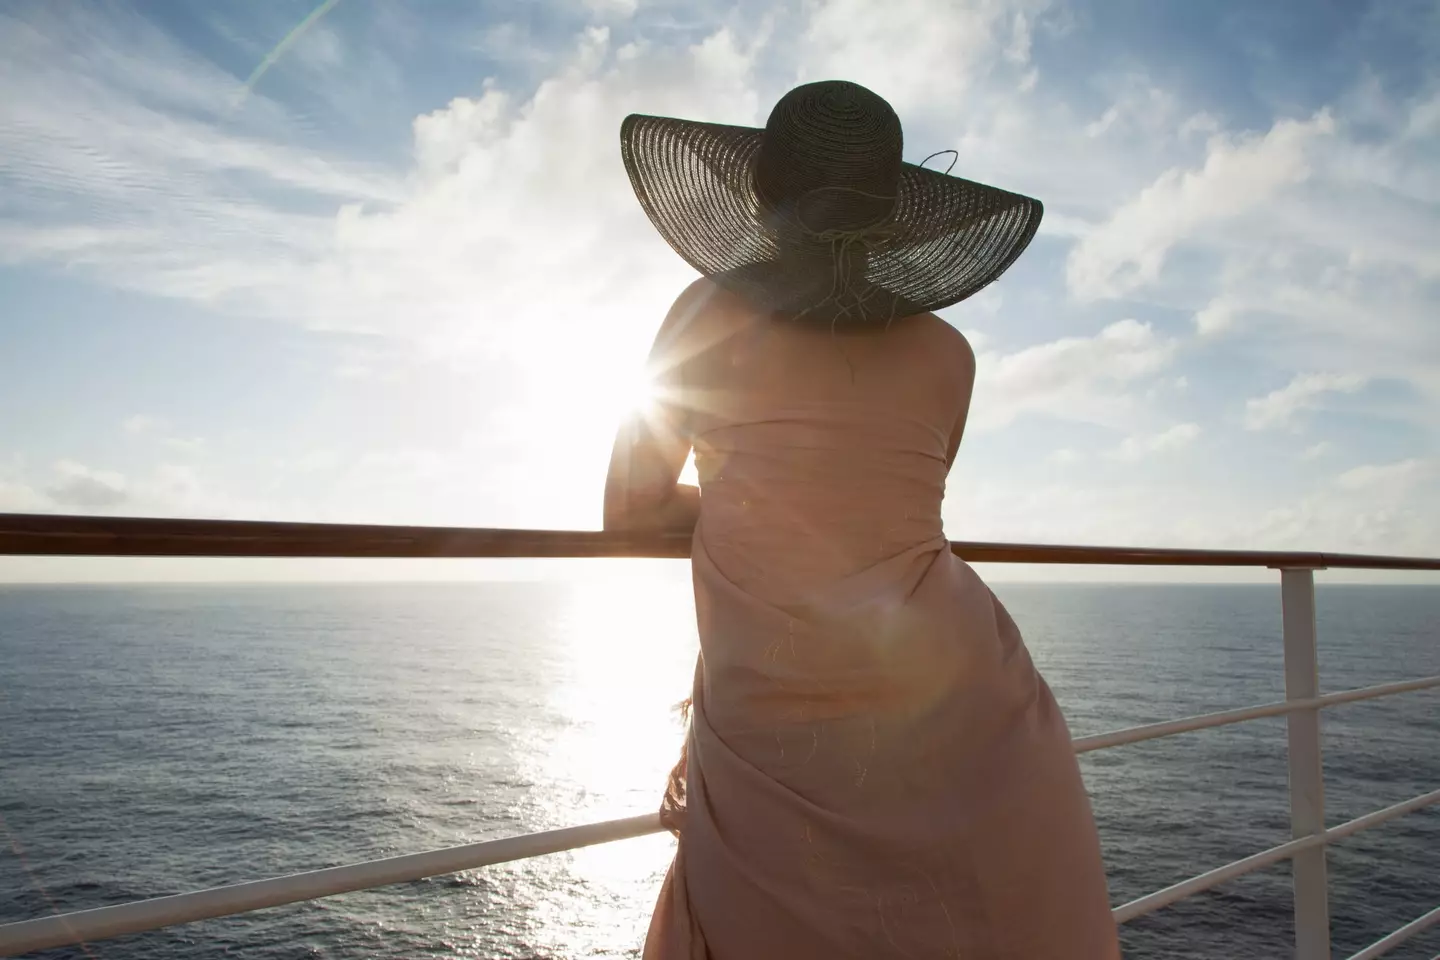 The 'entitled' woman was blacklisted from further cruises.